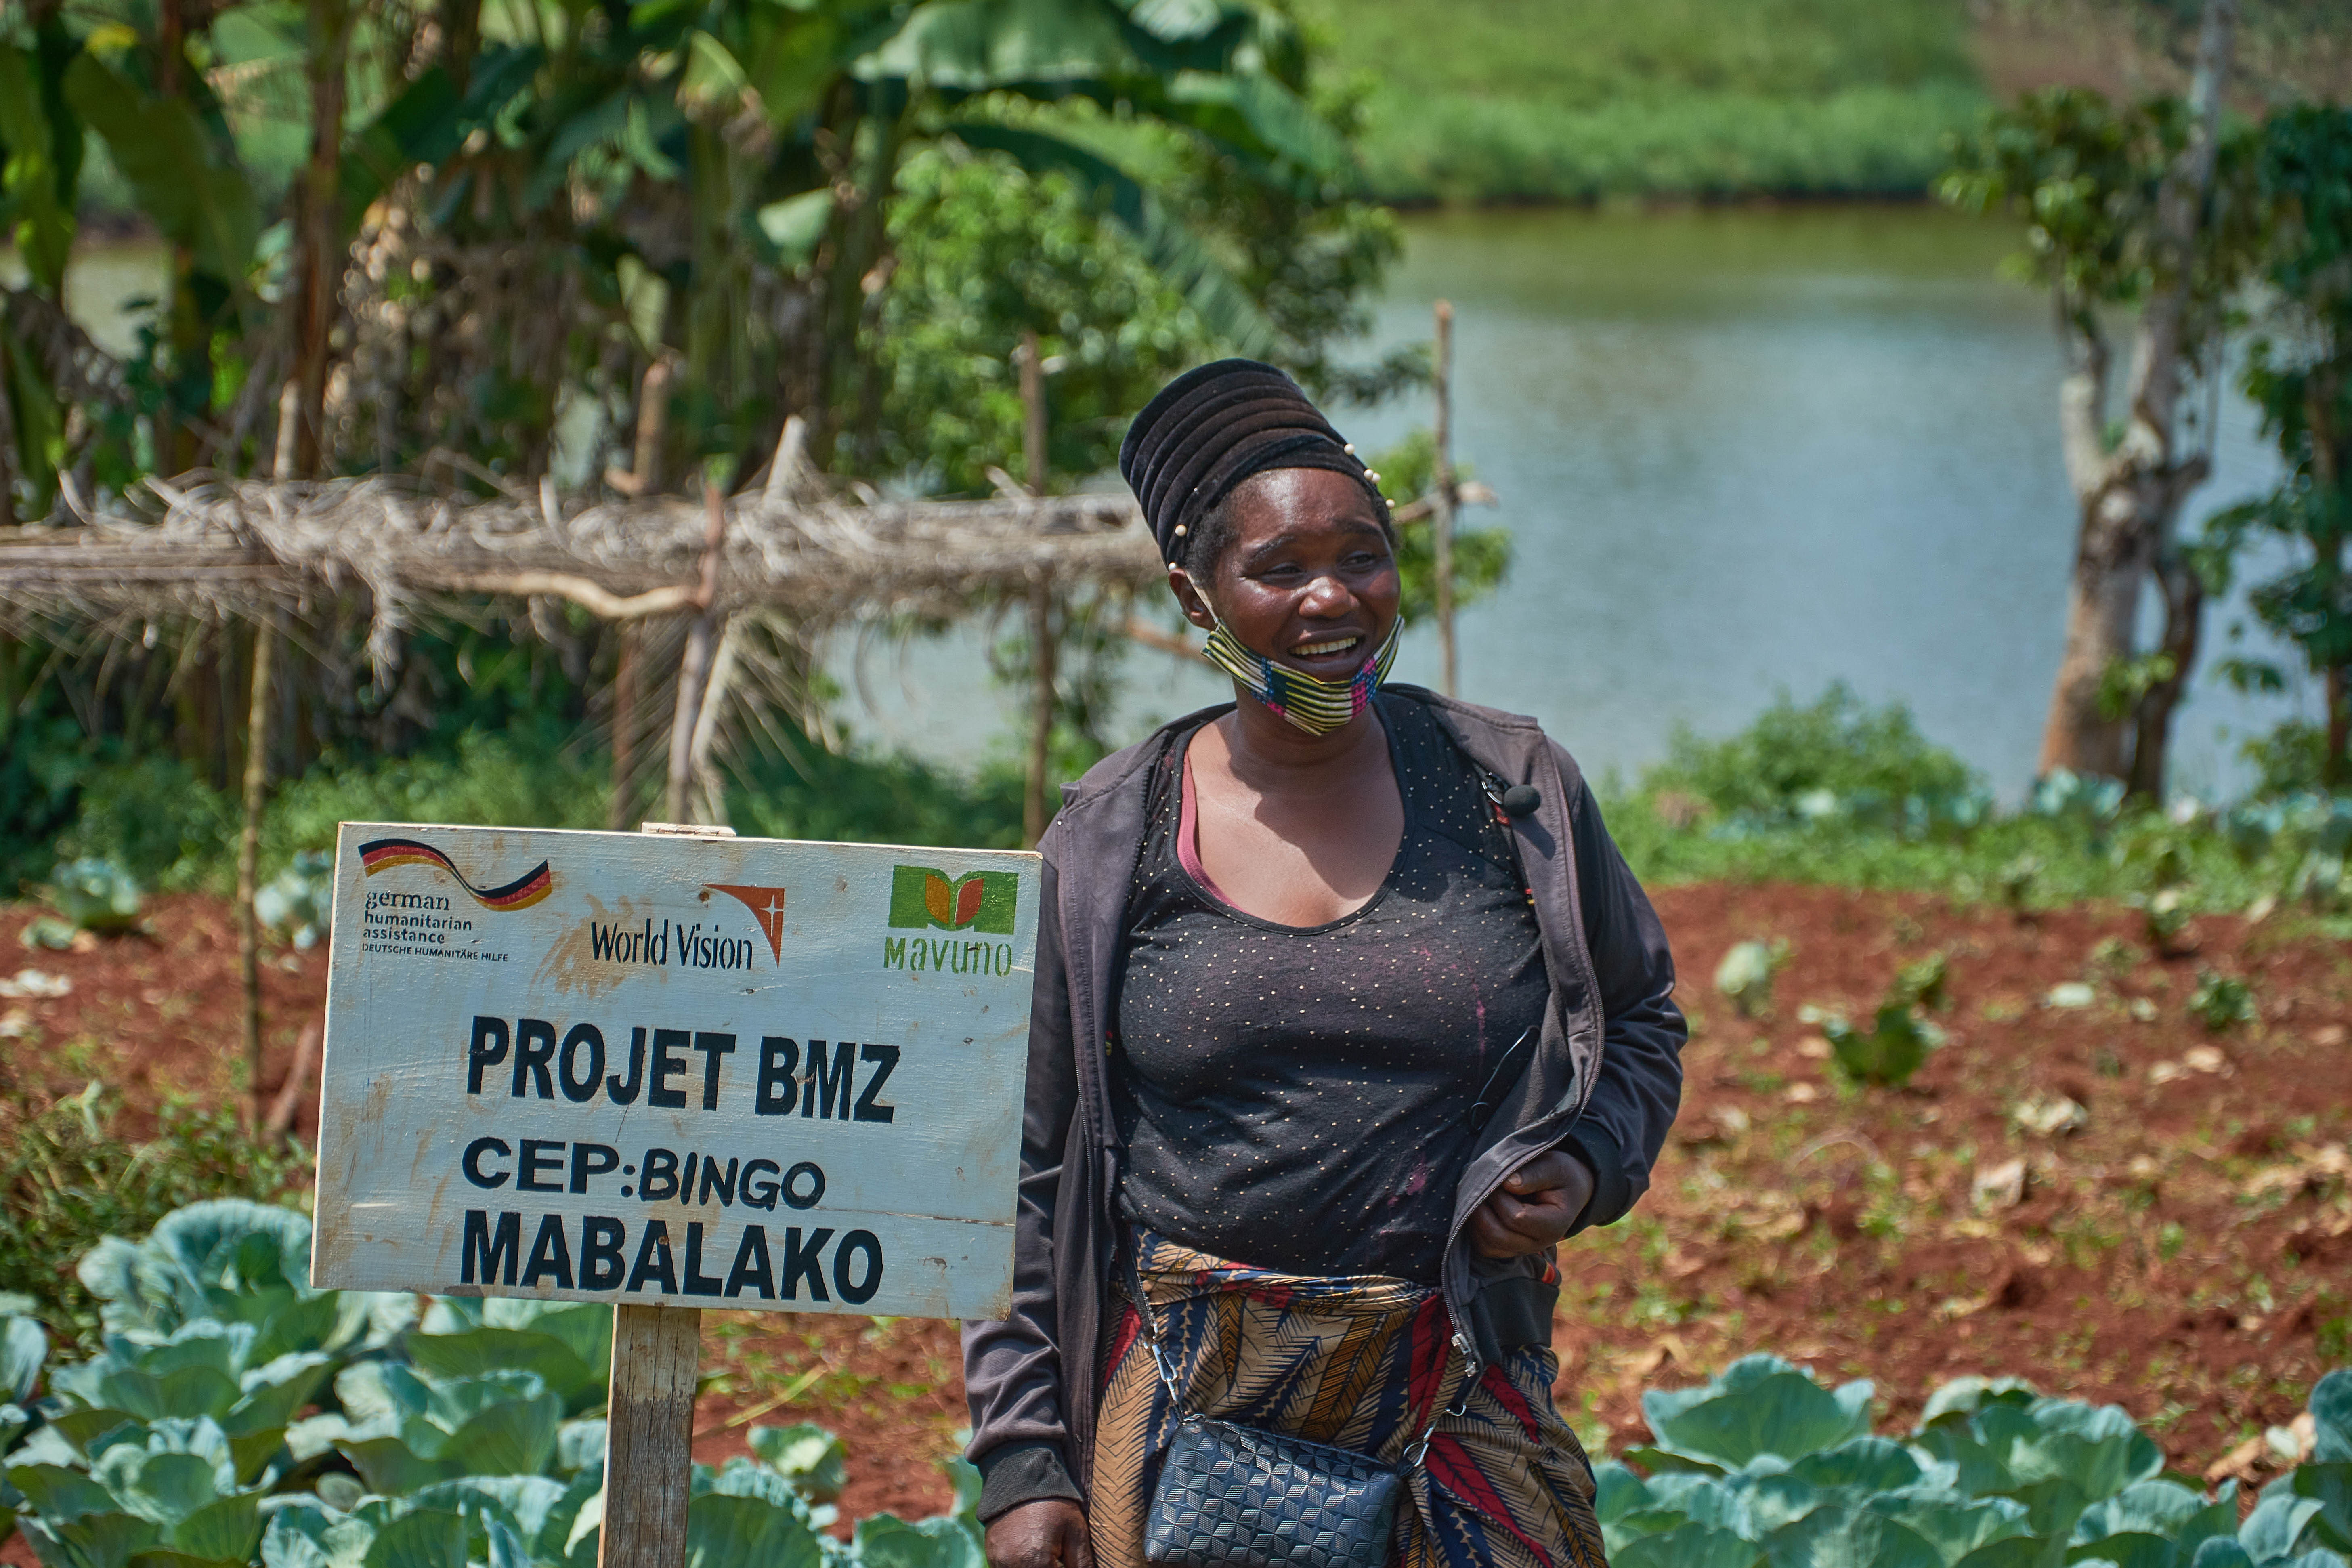 Farmer Chantal smiling in front of her cabbage farm field.